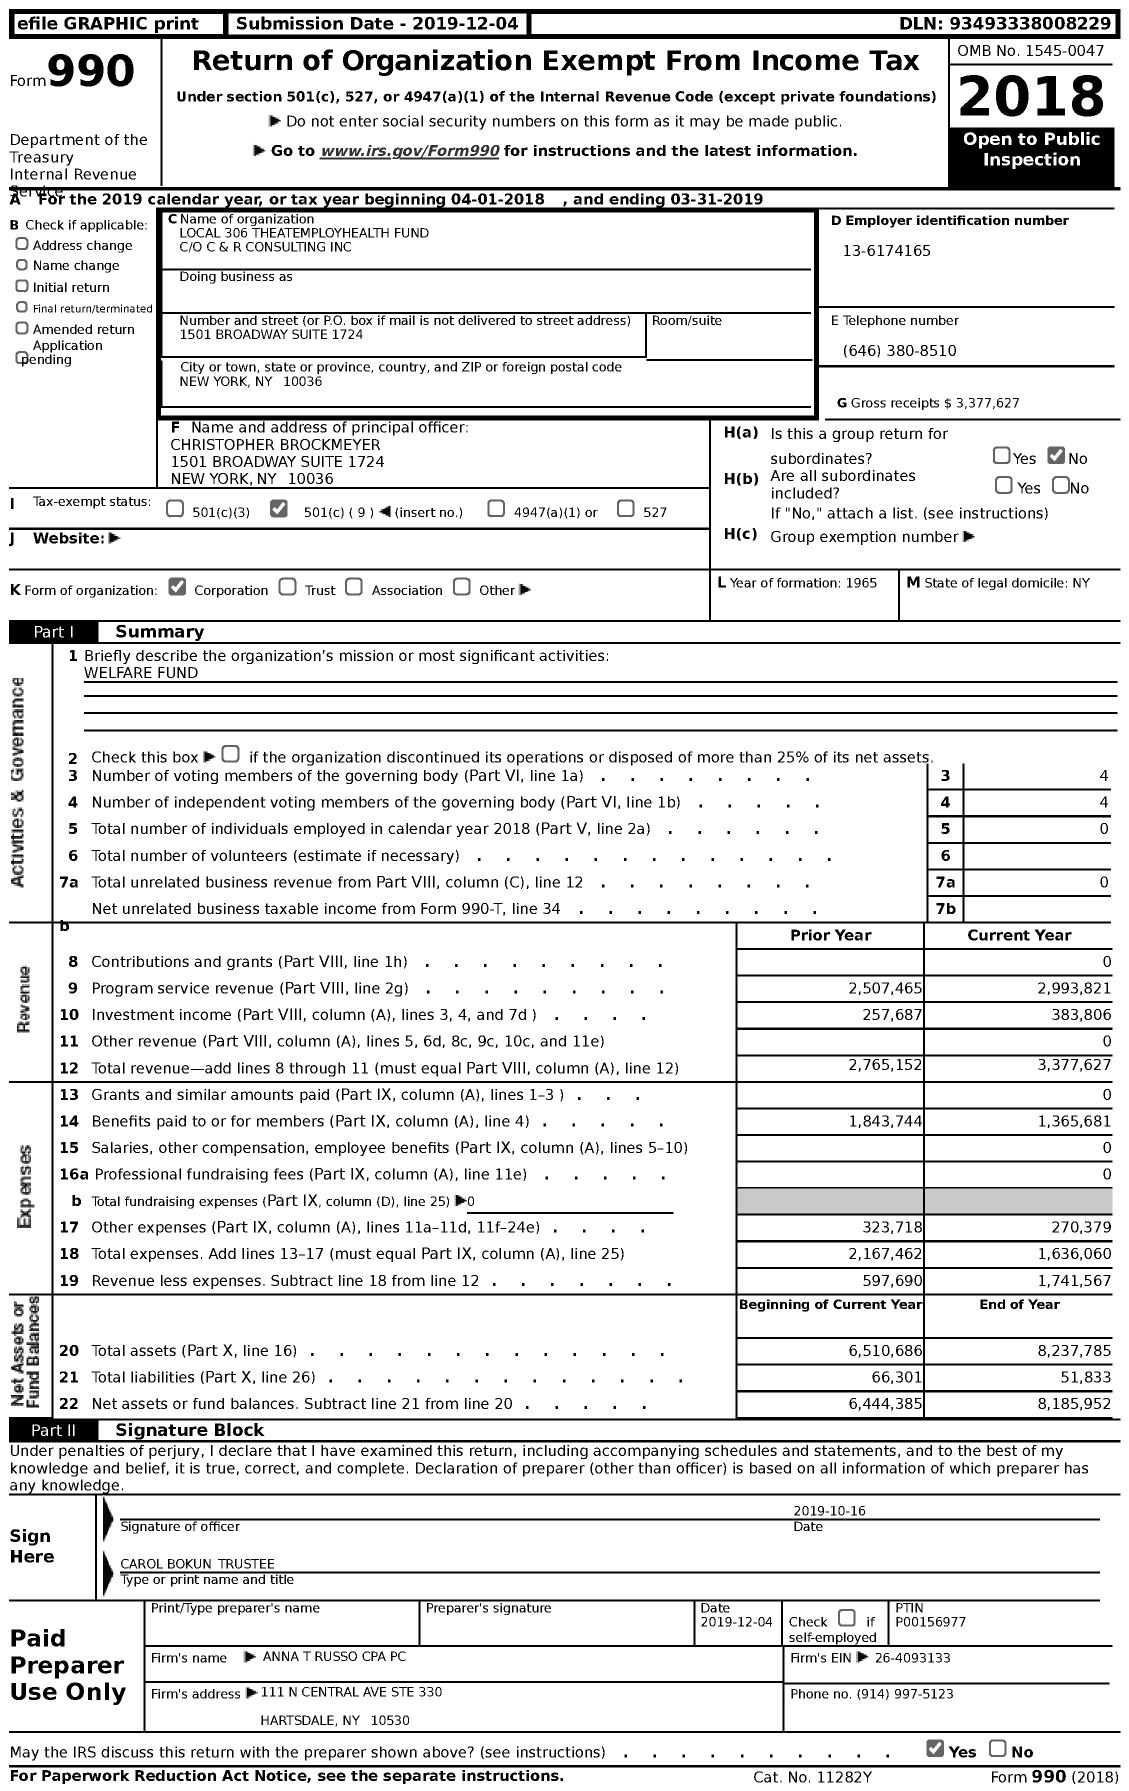 Image of first page of 2018 Form 990 for Local 306 TheatEmployHealth Fund